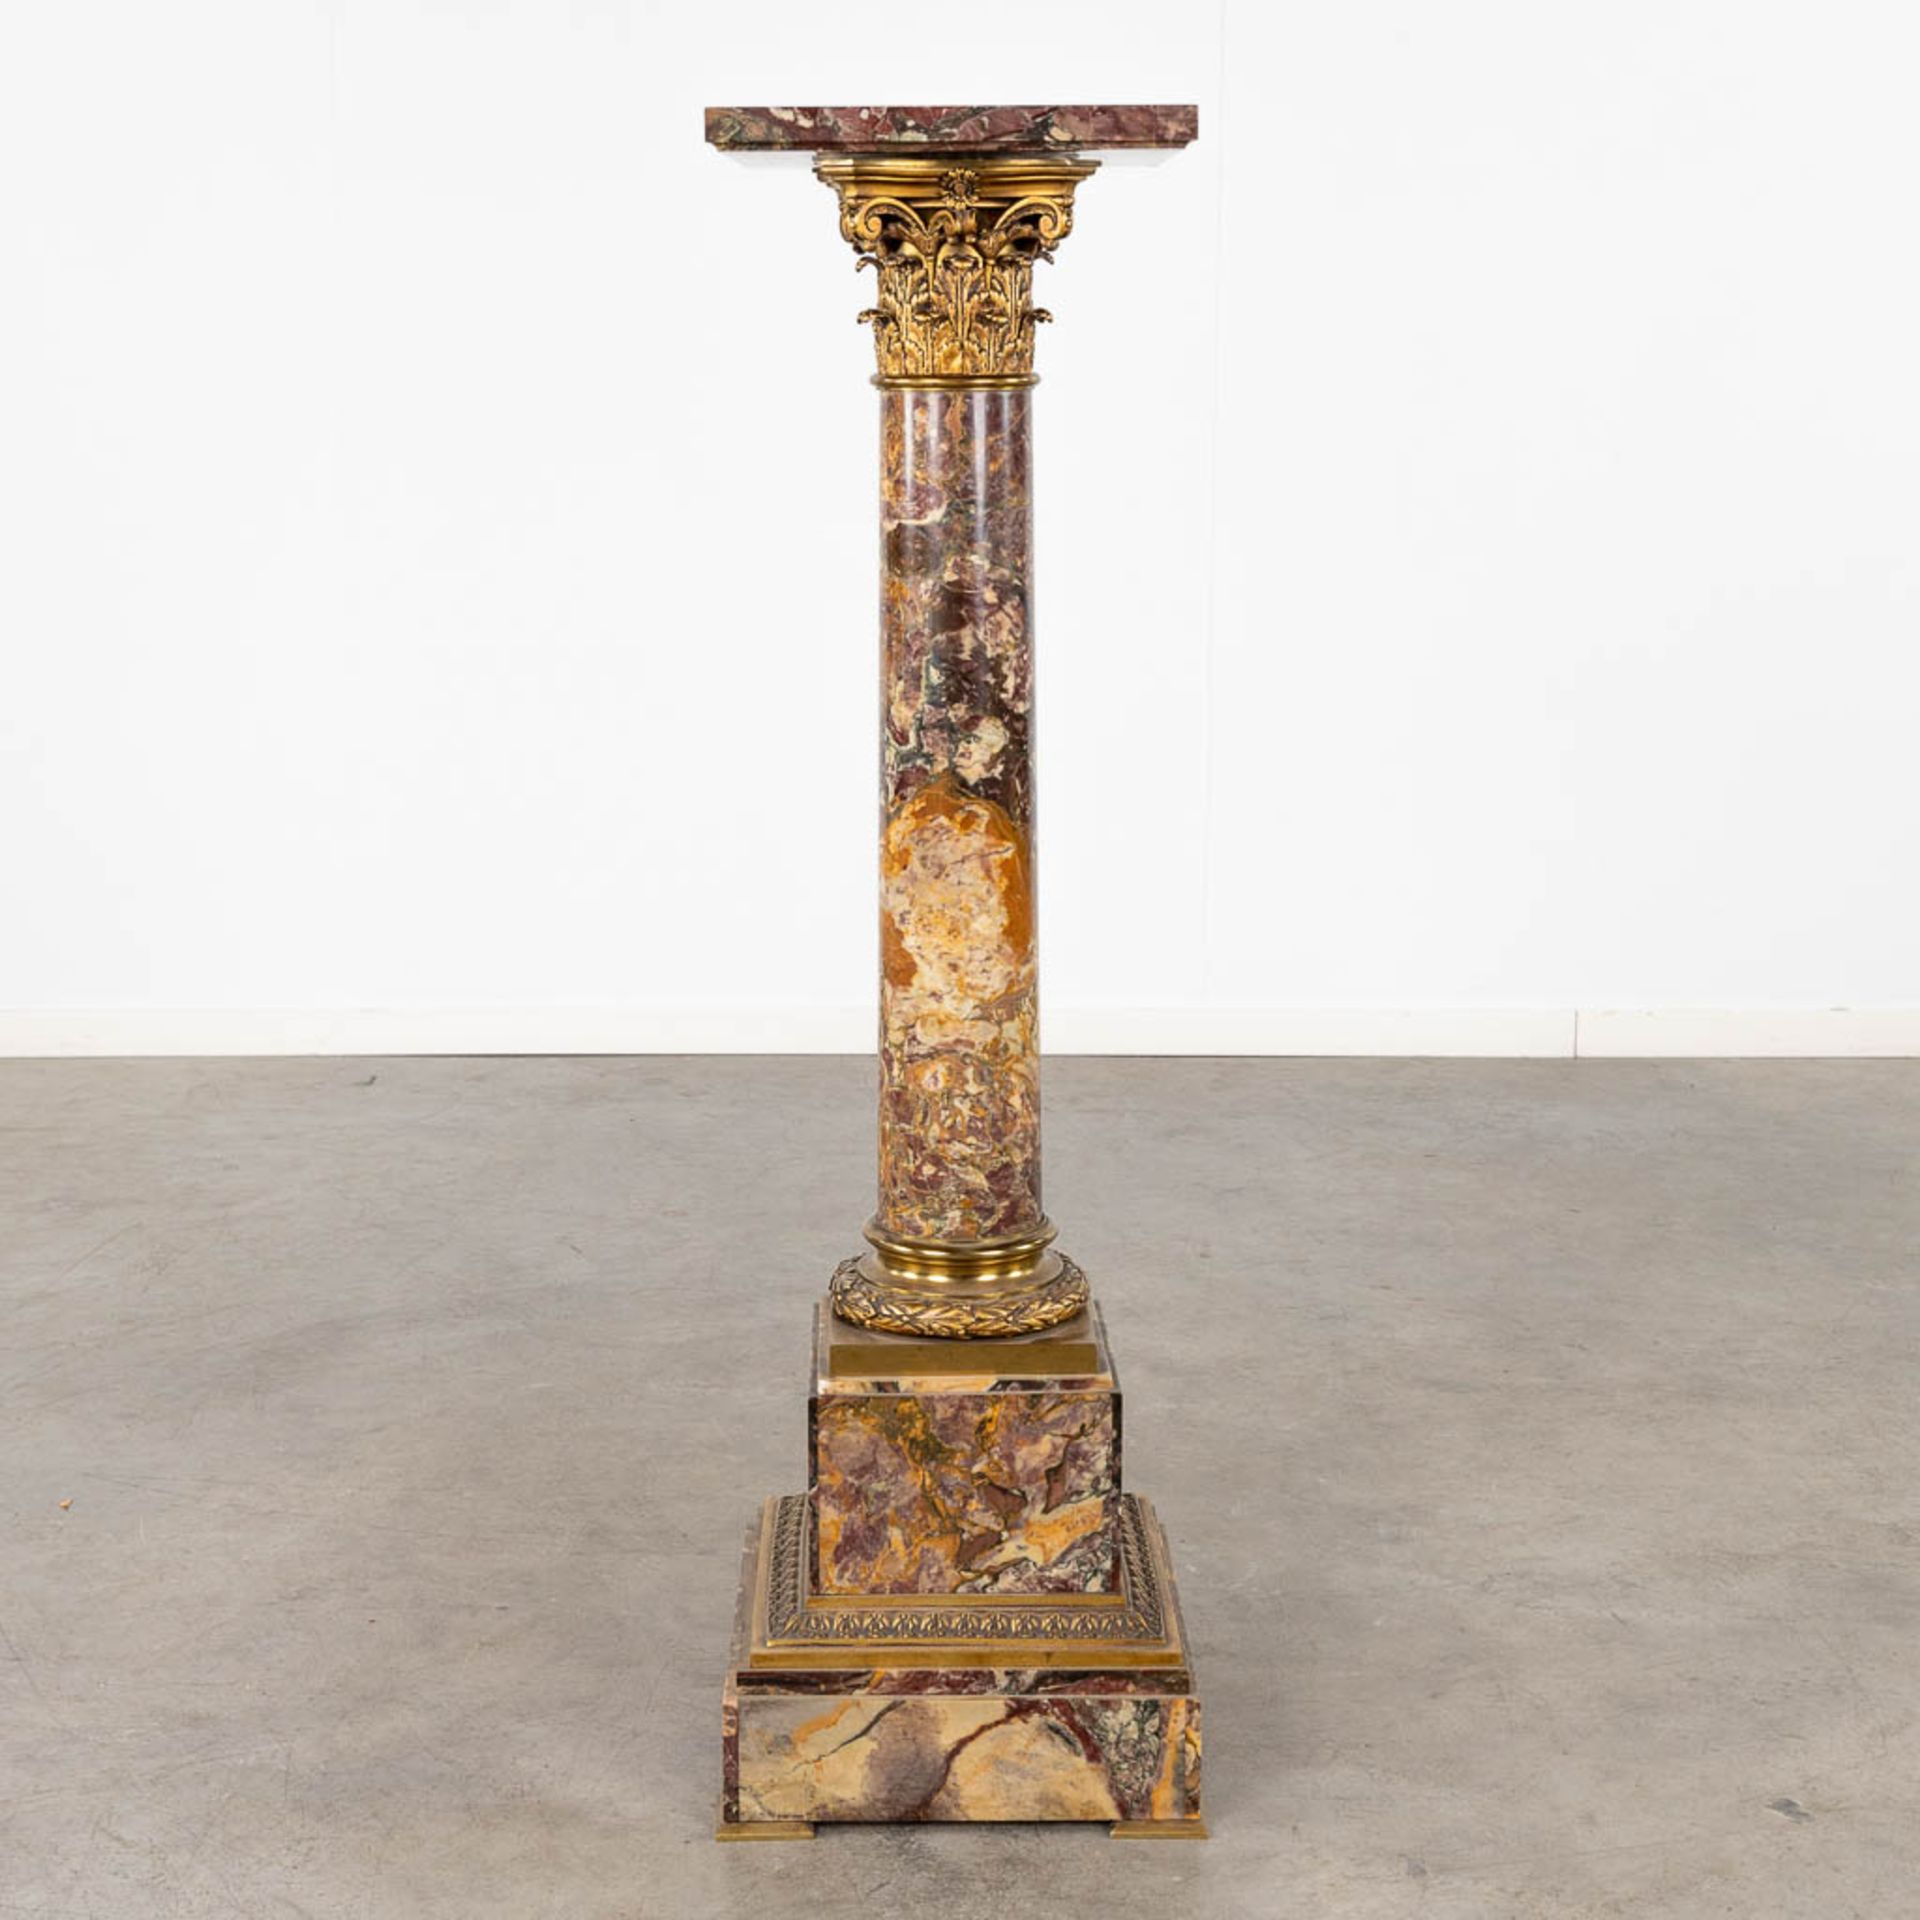 A pedestal, marble mounted with bronze in Corinthian style. Circa 1920. (D:35 x W:35 x H:120 cm) - Image 5 of 13